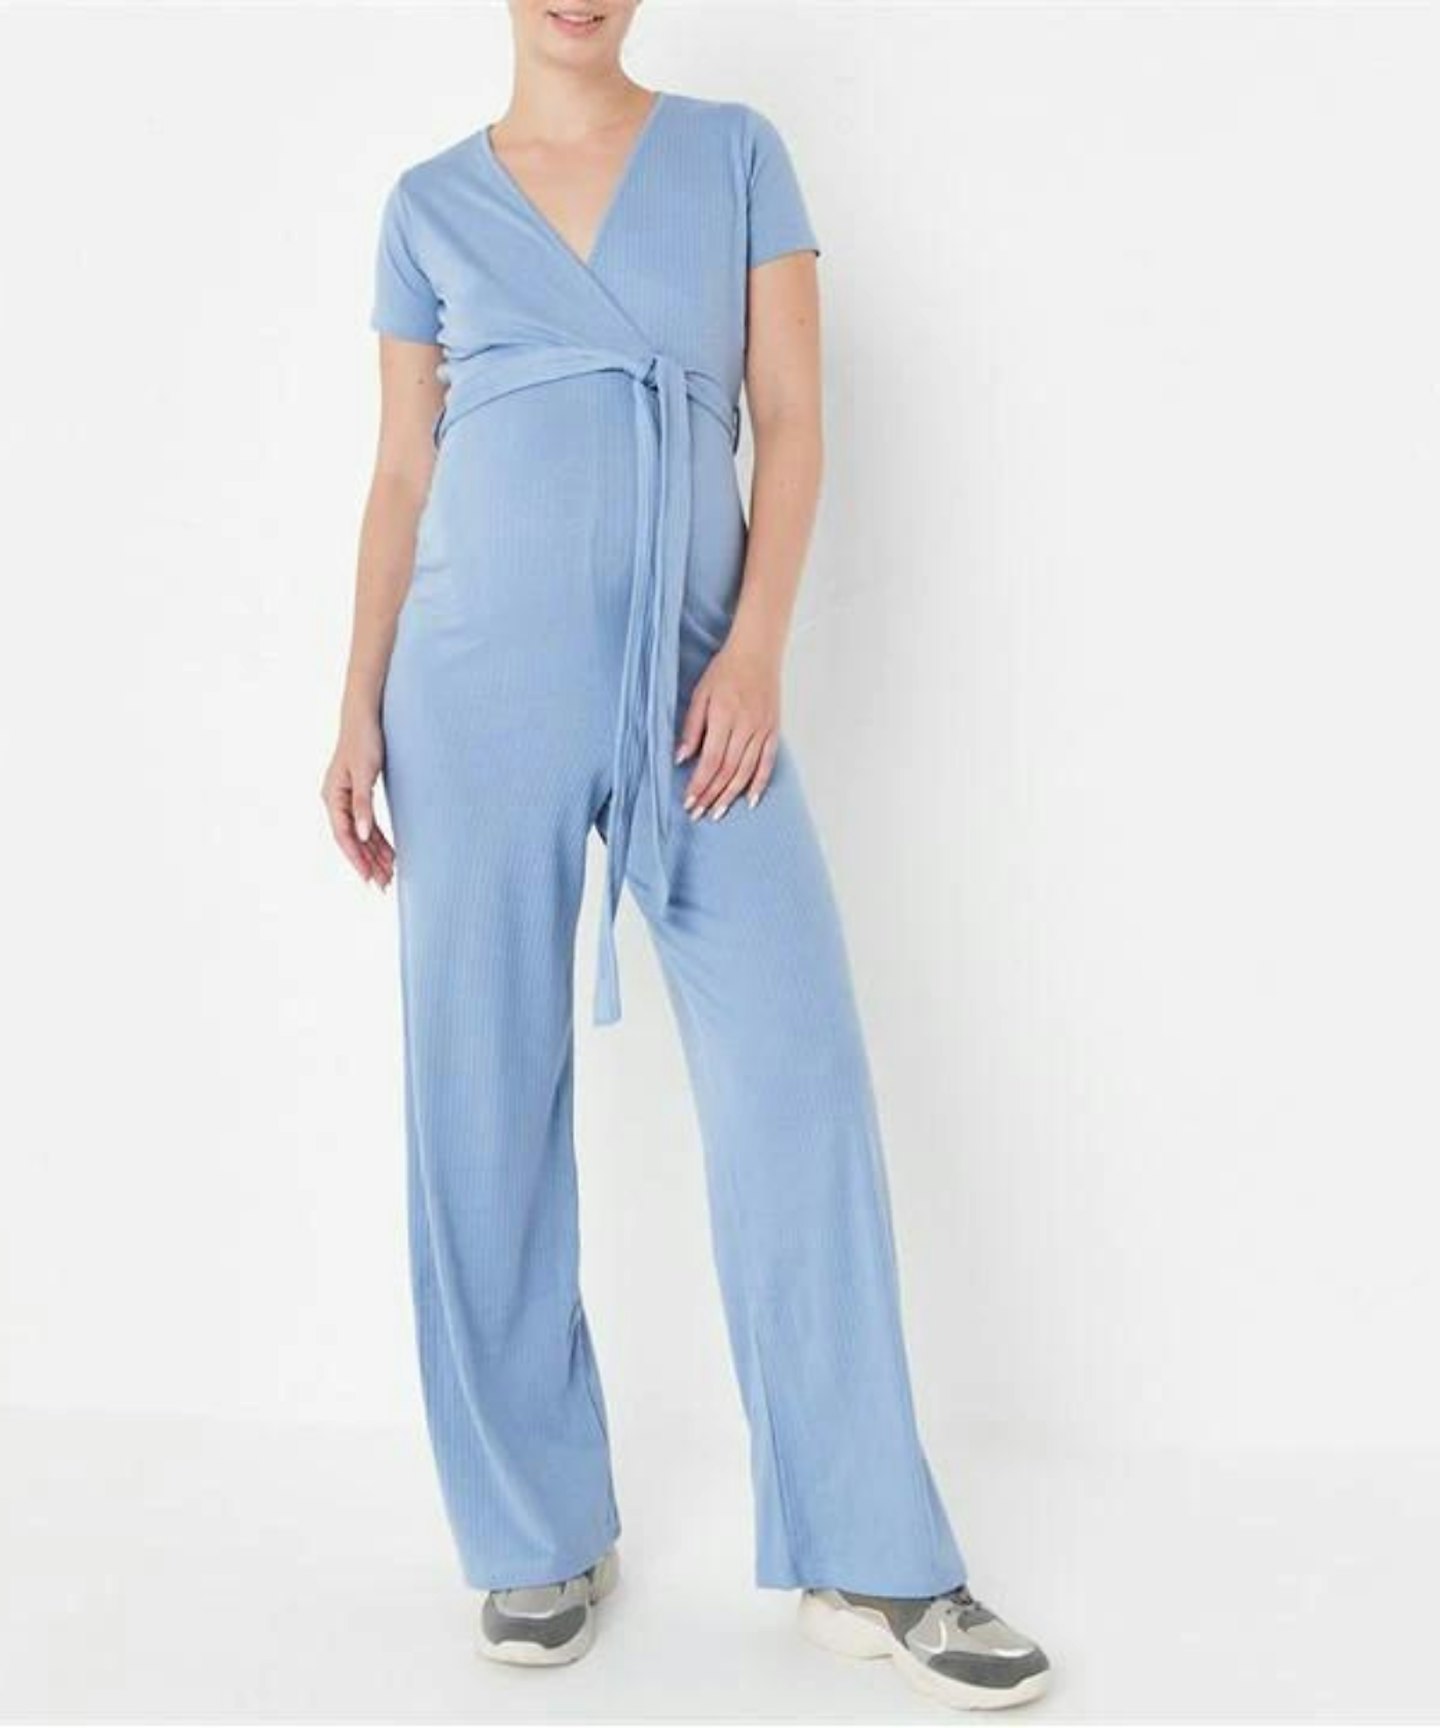 Missguided Rib V Neck Belted Maternity Jumpsuit